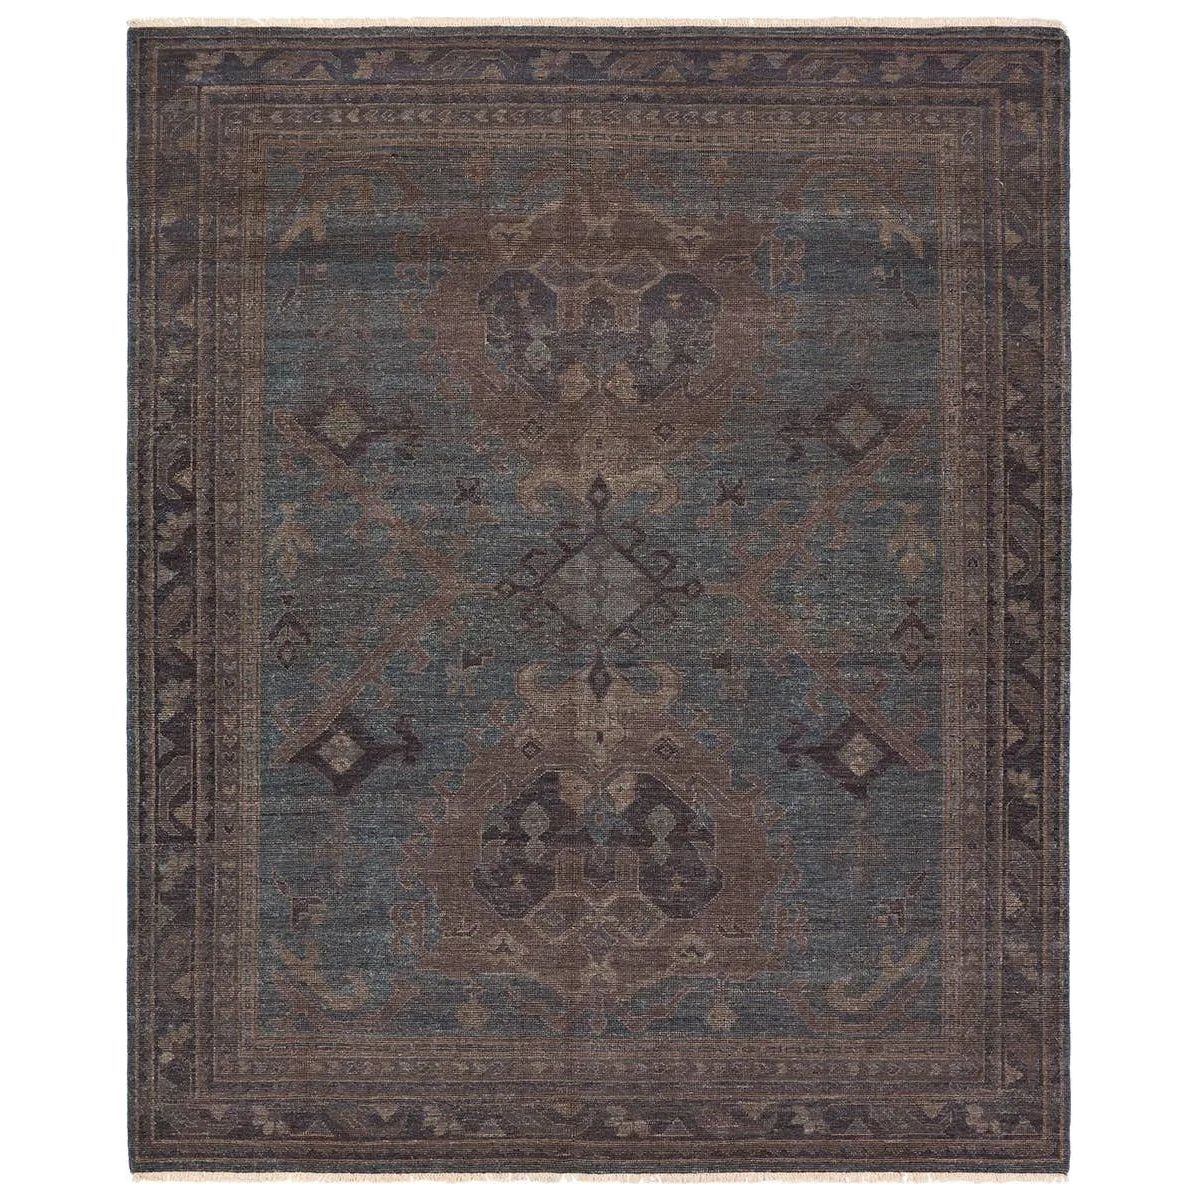 The Rhapsody Jodion features heirloom-quality designs of stunningly abrashed Old World patterns. The Jodion area rug boasts a beautifully distressed dual-medallion motif with a decorative, multi-layered border and geometric detailing. The blue, brown, and gray hues add depth and intrigue. Amethyst Home provides interior design, new home construction design consulting, vintage area rugs, and lighting in the Scottsdale metro area.